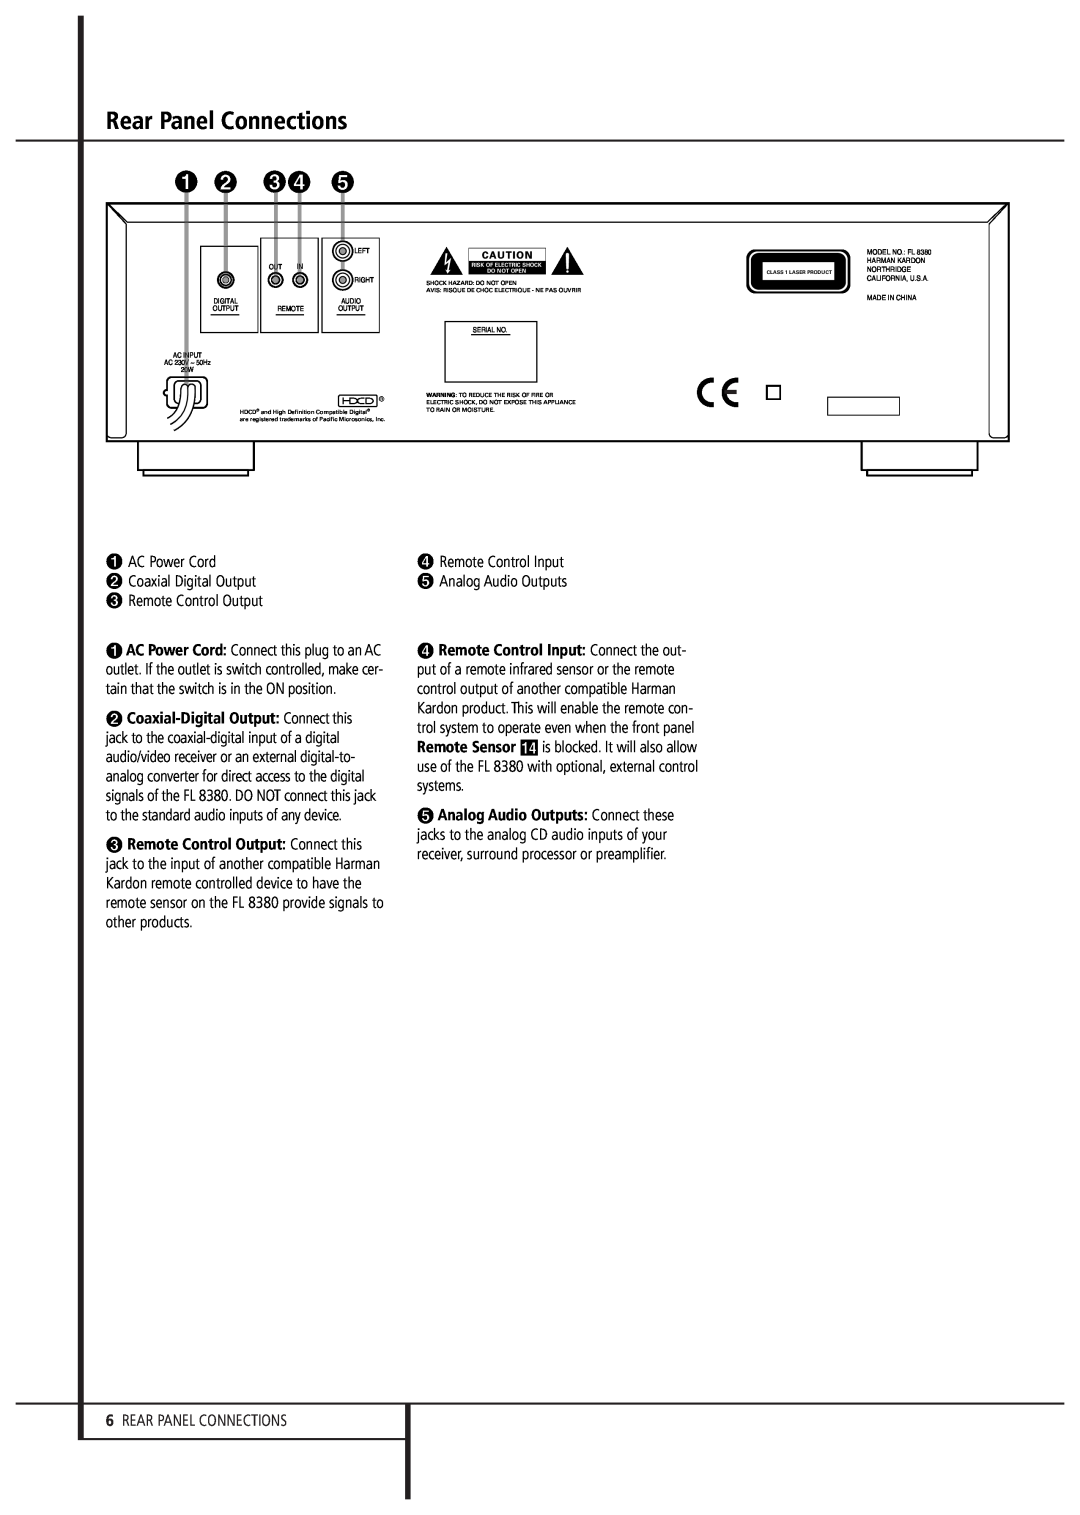 Harman FL 8380 owner manual Rear Panel Connections, ¡ £¢ ∞, AC Power Cord, Coaxial Digital Output, Remote Control Output 